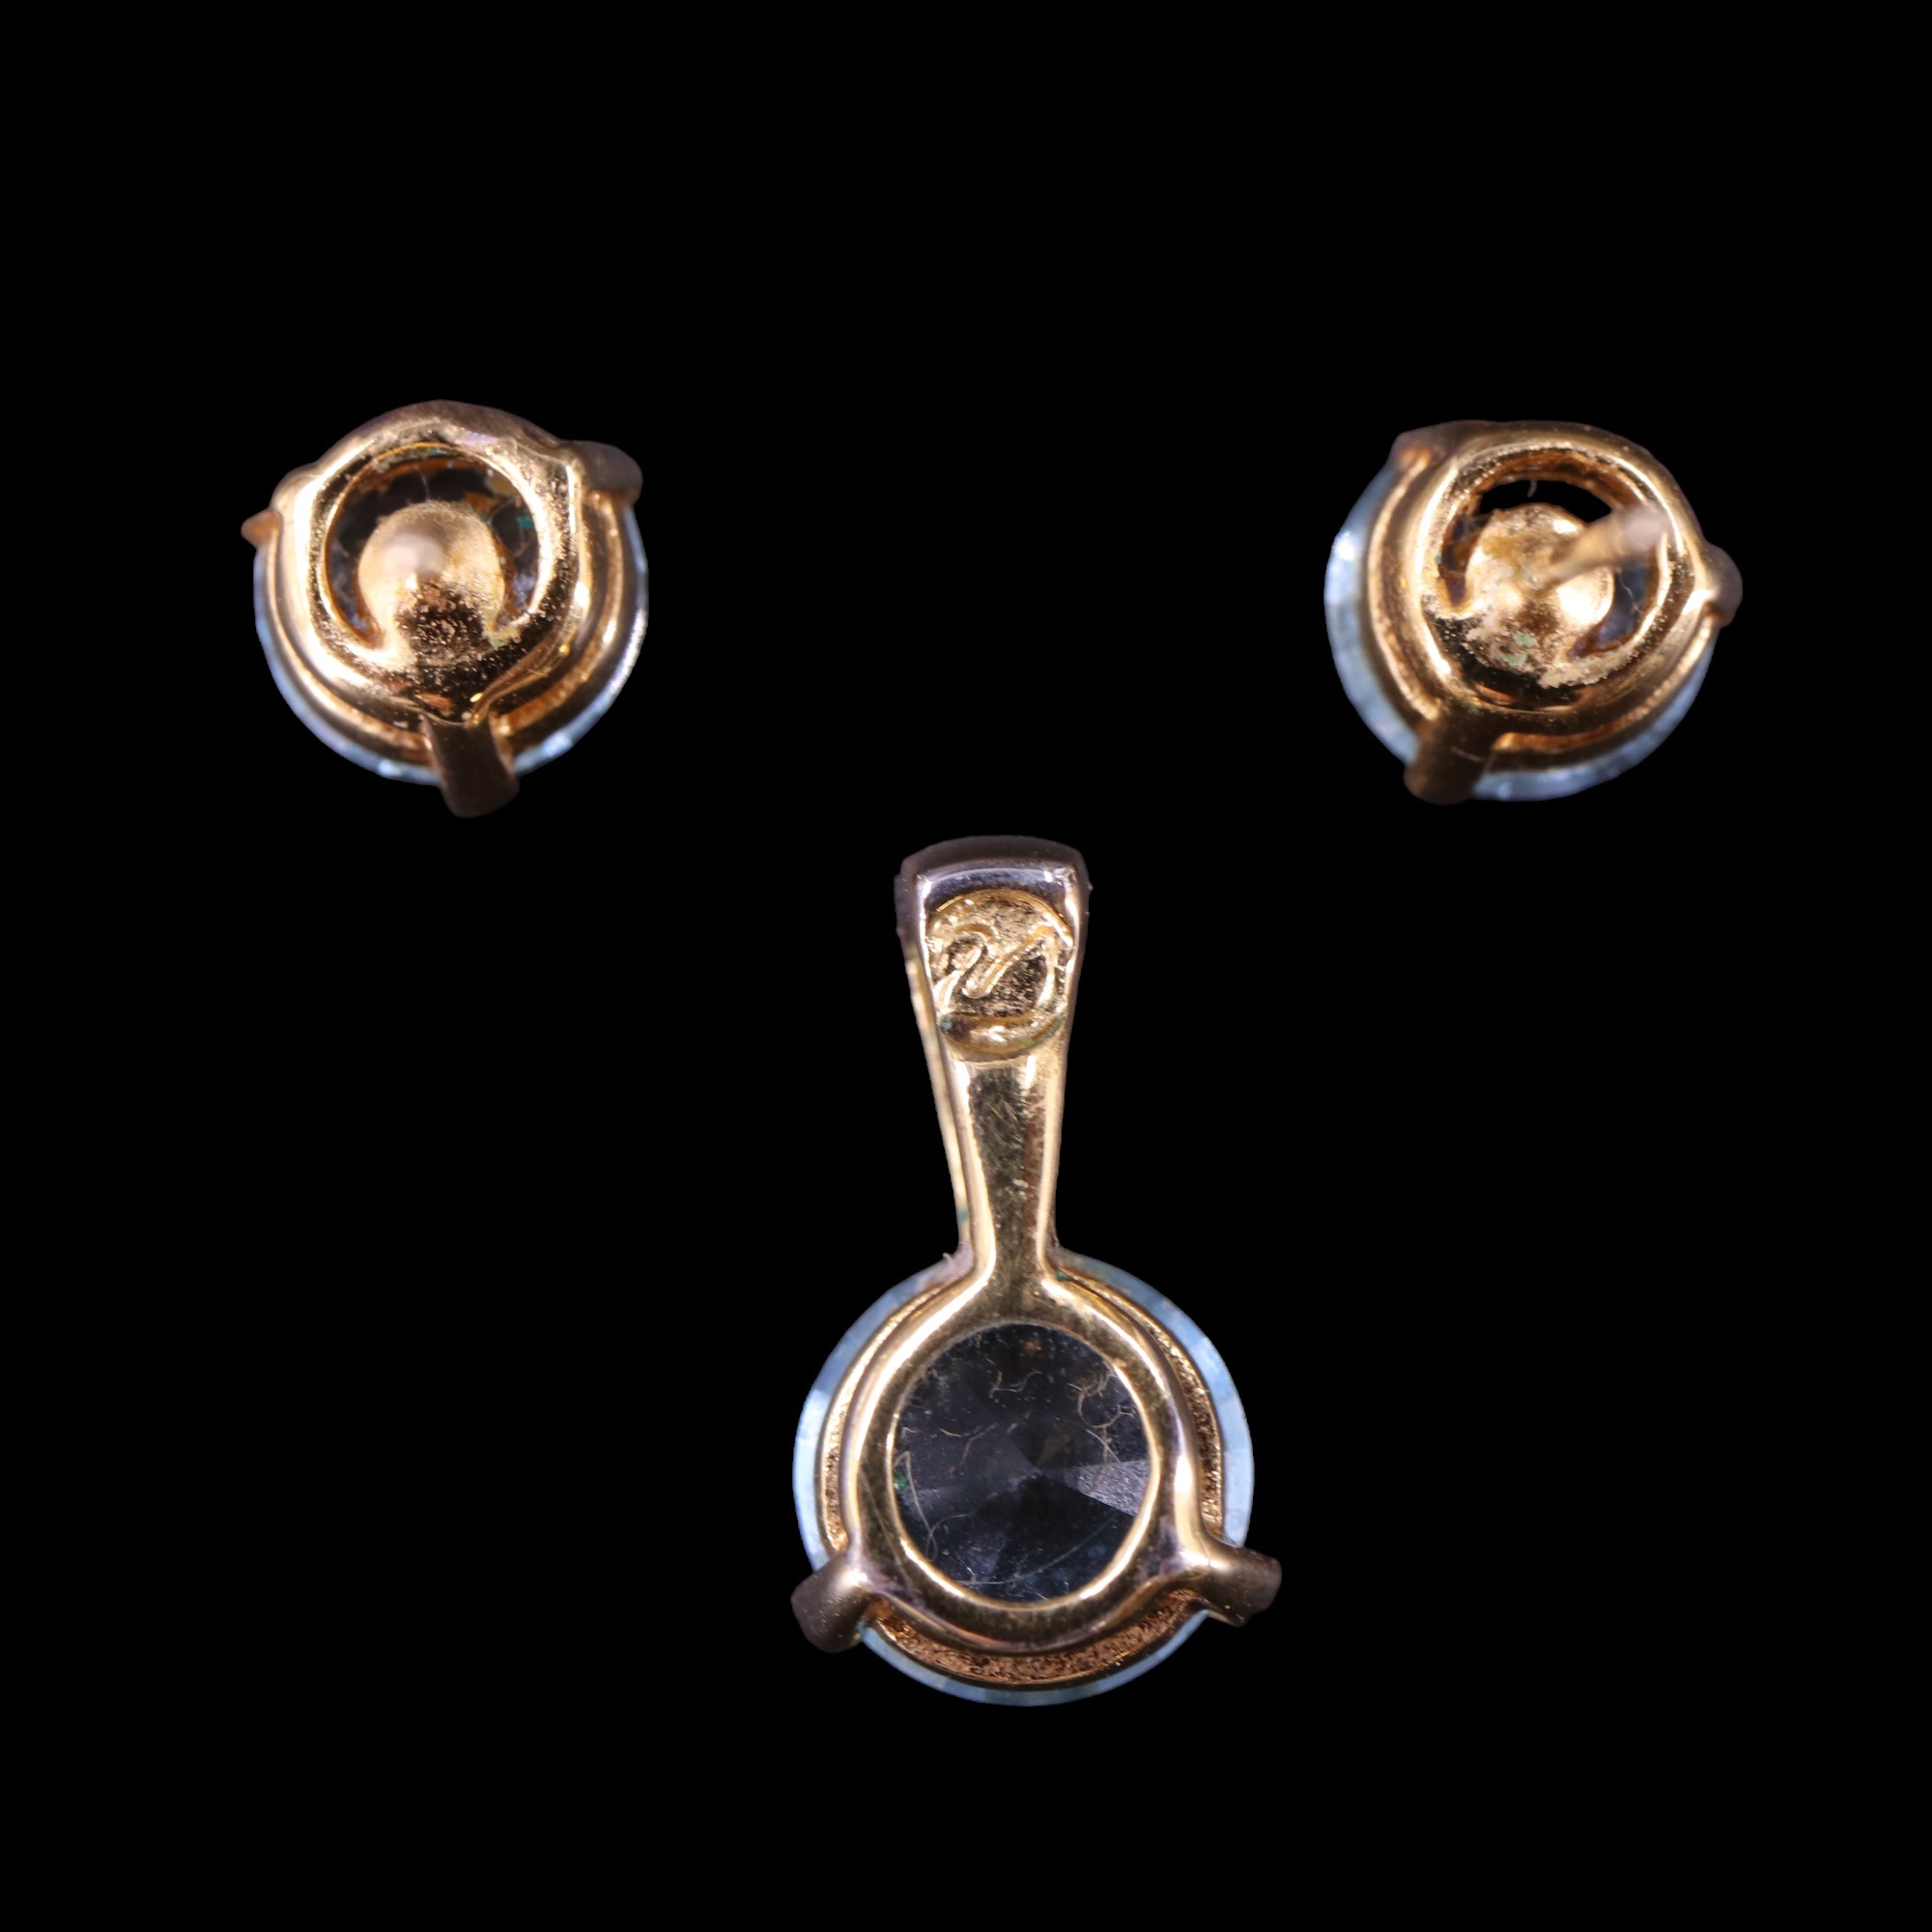 A Swarovski blue crystal pendant together with a pair of similar stud earrings - Image 2 of 3